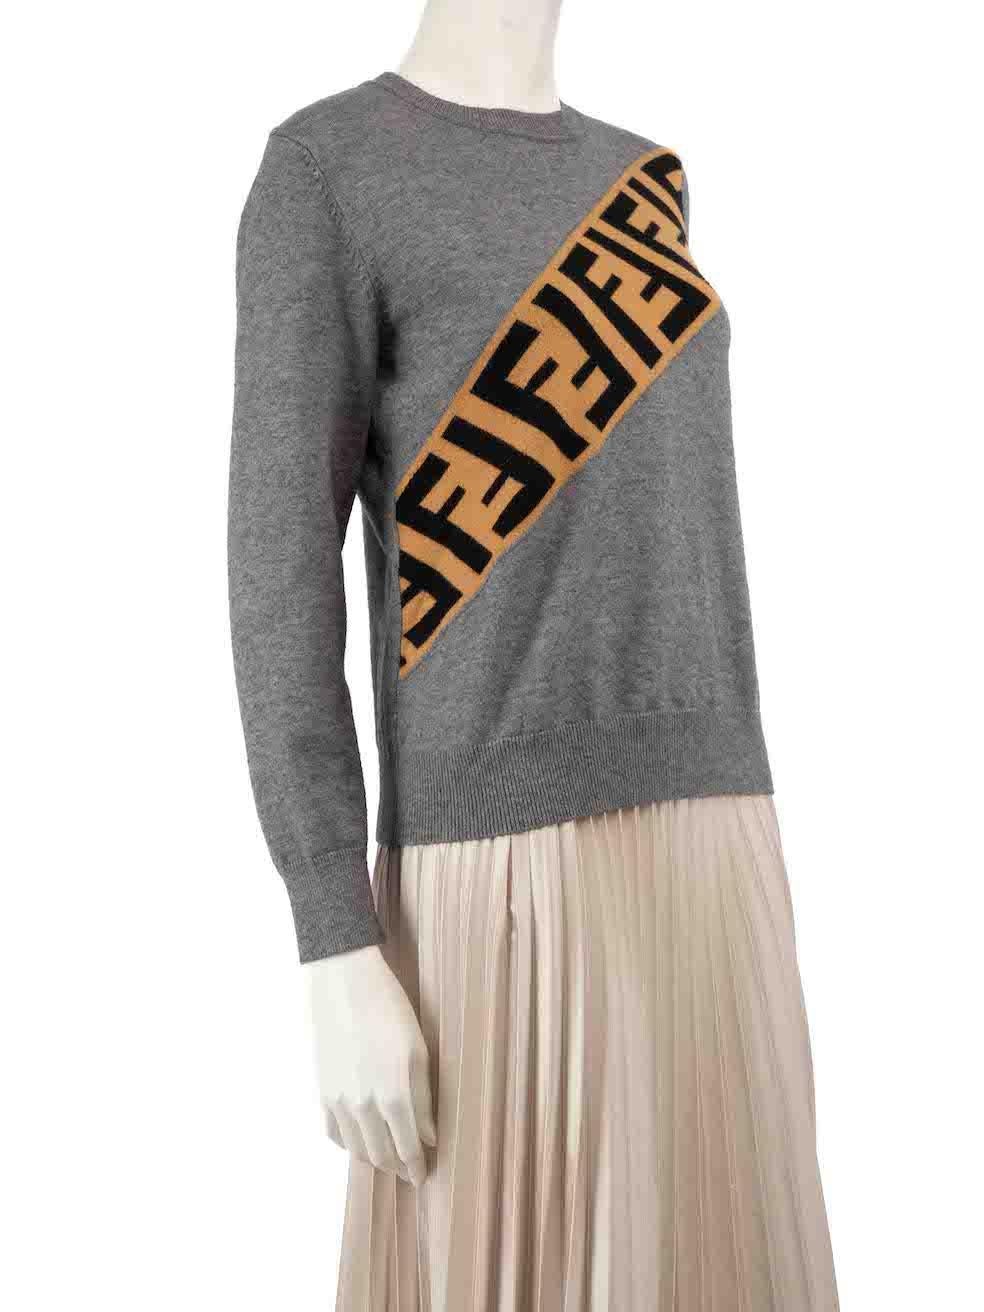 CONDITION is Very good. Hardly any visible wear to jumper is evident on this used Fendi designer resale item.
 
 
 
 Details
 
 
 Grey
 
 Viscose
 
 Long sleeves jumper
 
 Knitted and stretchy
 
 Round neckline
 
 FF logo detail
 
 
 
 
 
 Made in